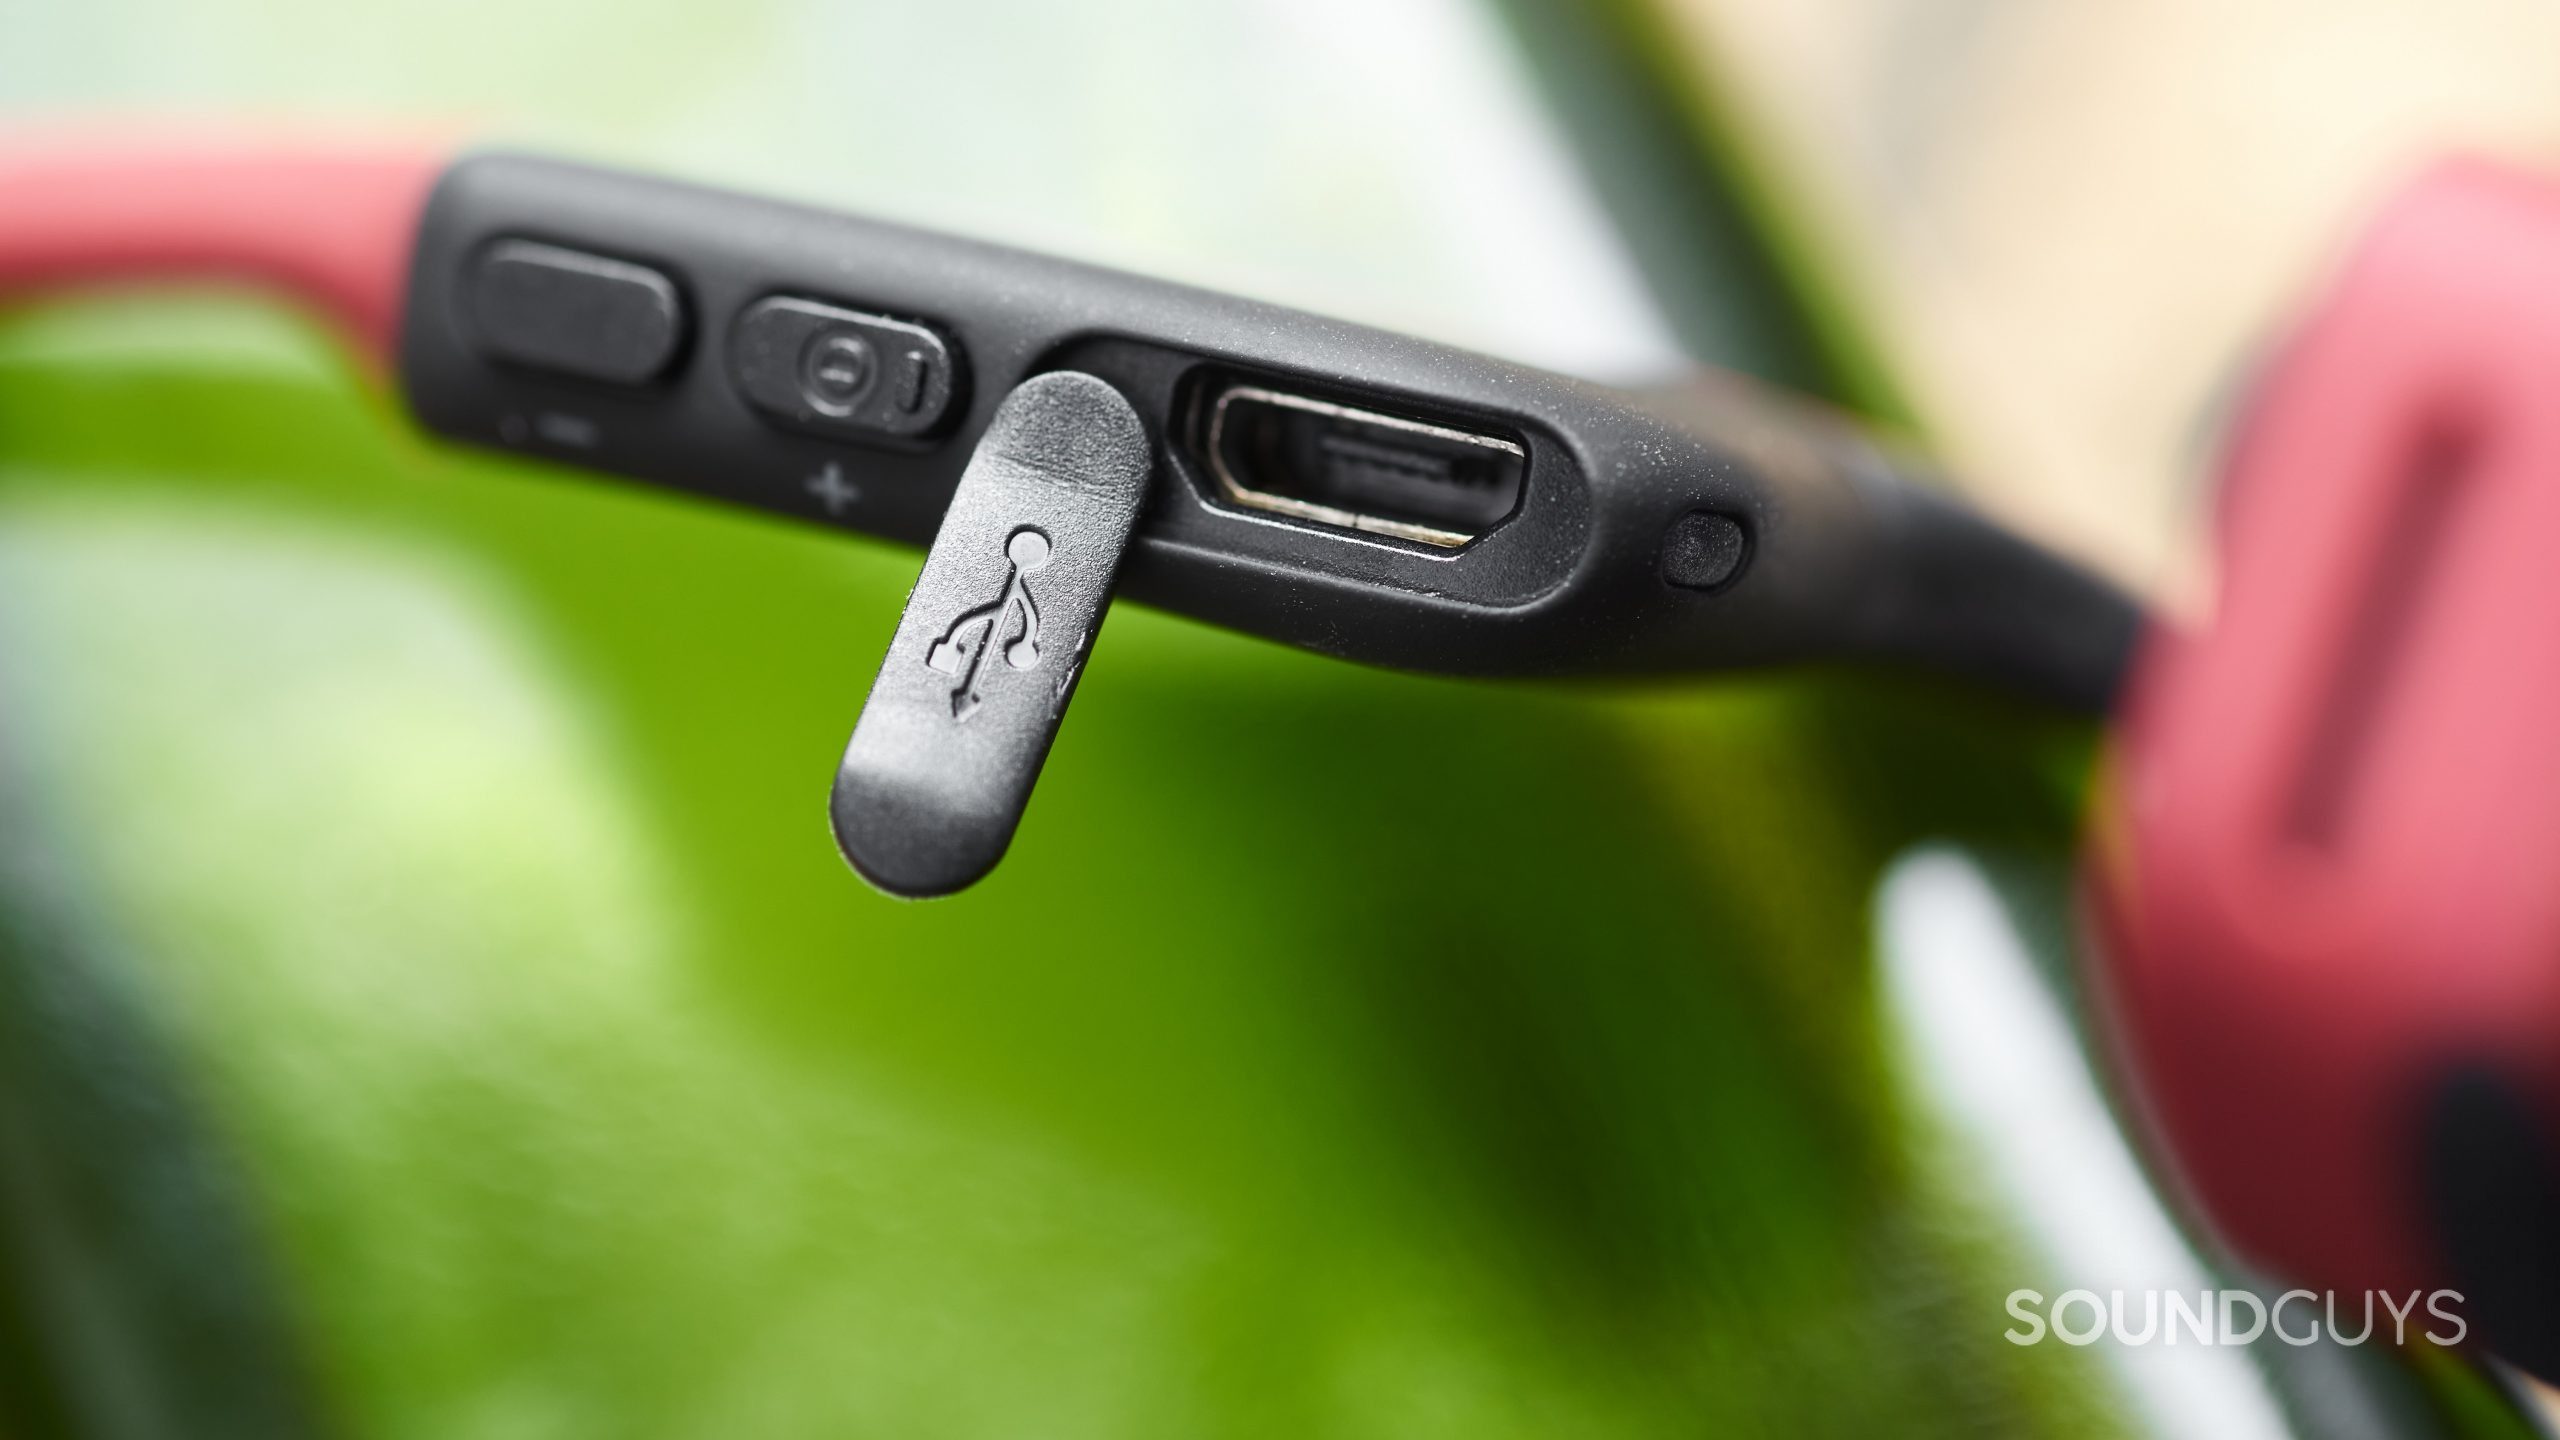 The AfterShokz Air bone conduction headphones' microUSB port revealed with the protective flap off to the side.